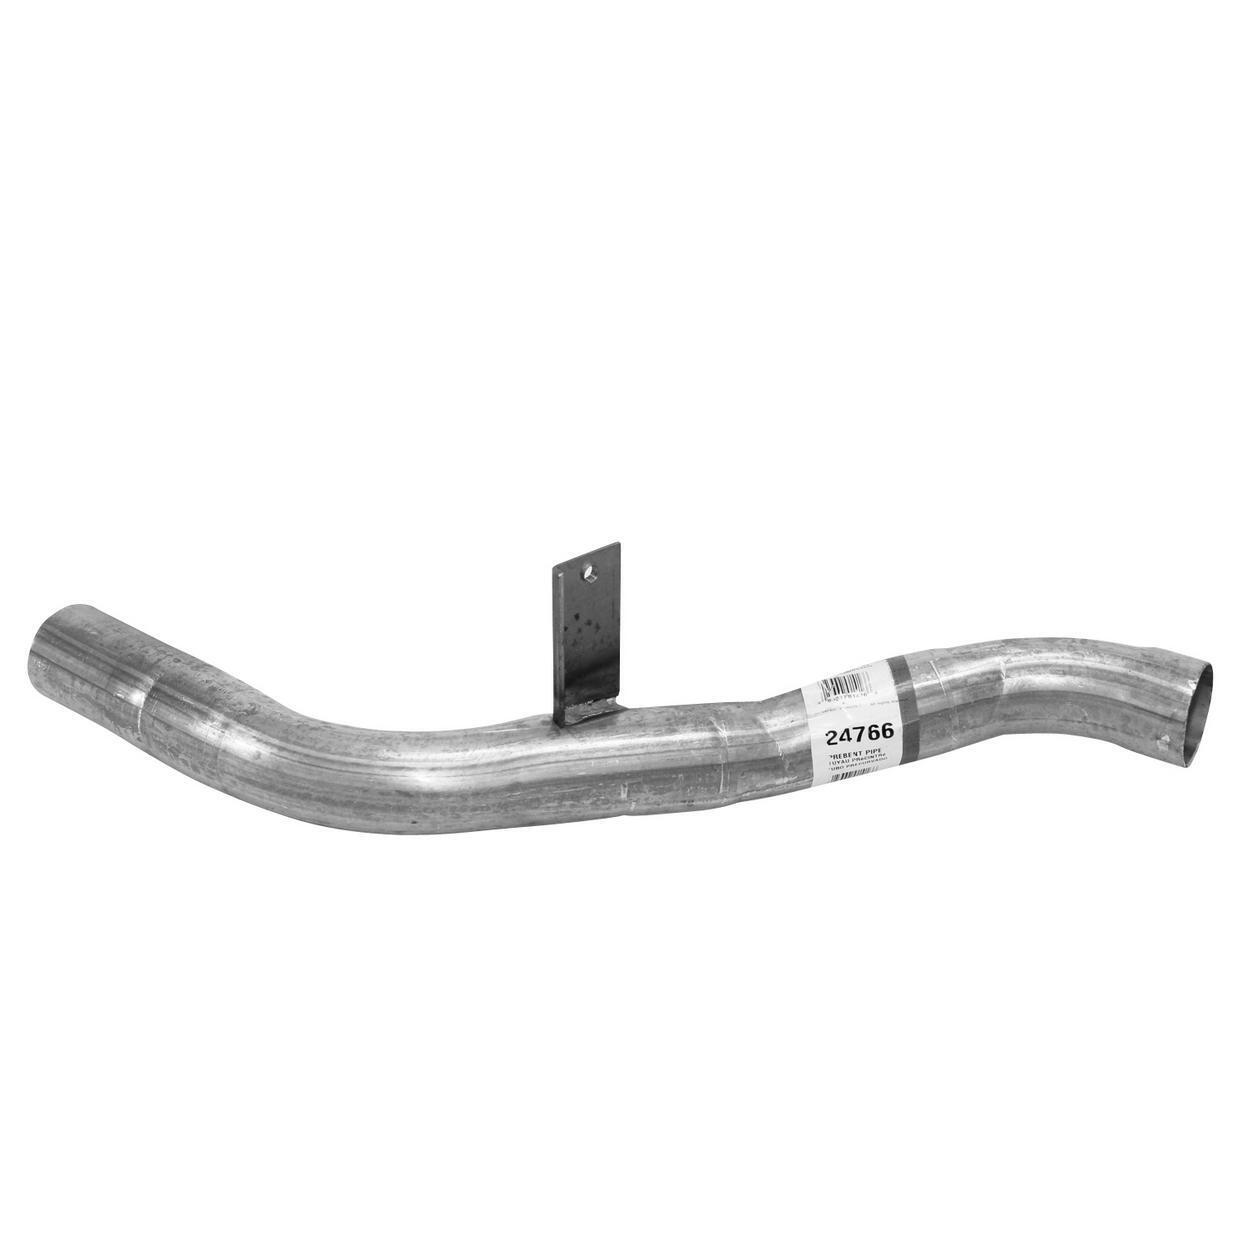 Exhaust Tail Pipe for 1991-1993 Oldsmobile Cutlass Ciera 3.3L V6 GAS OHV